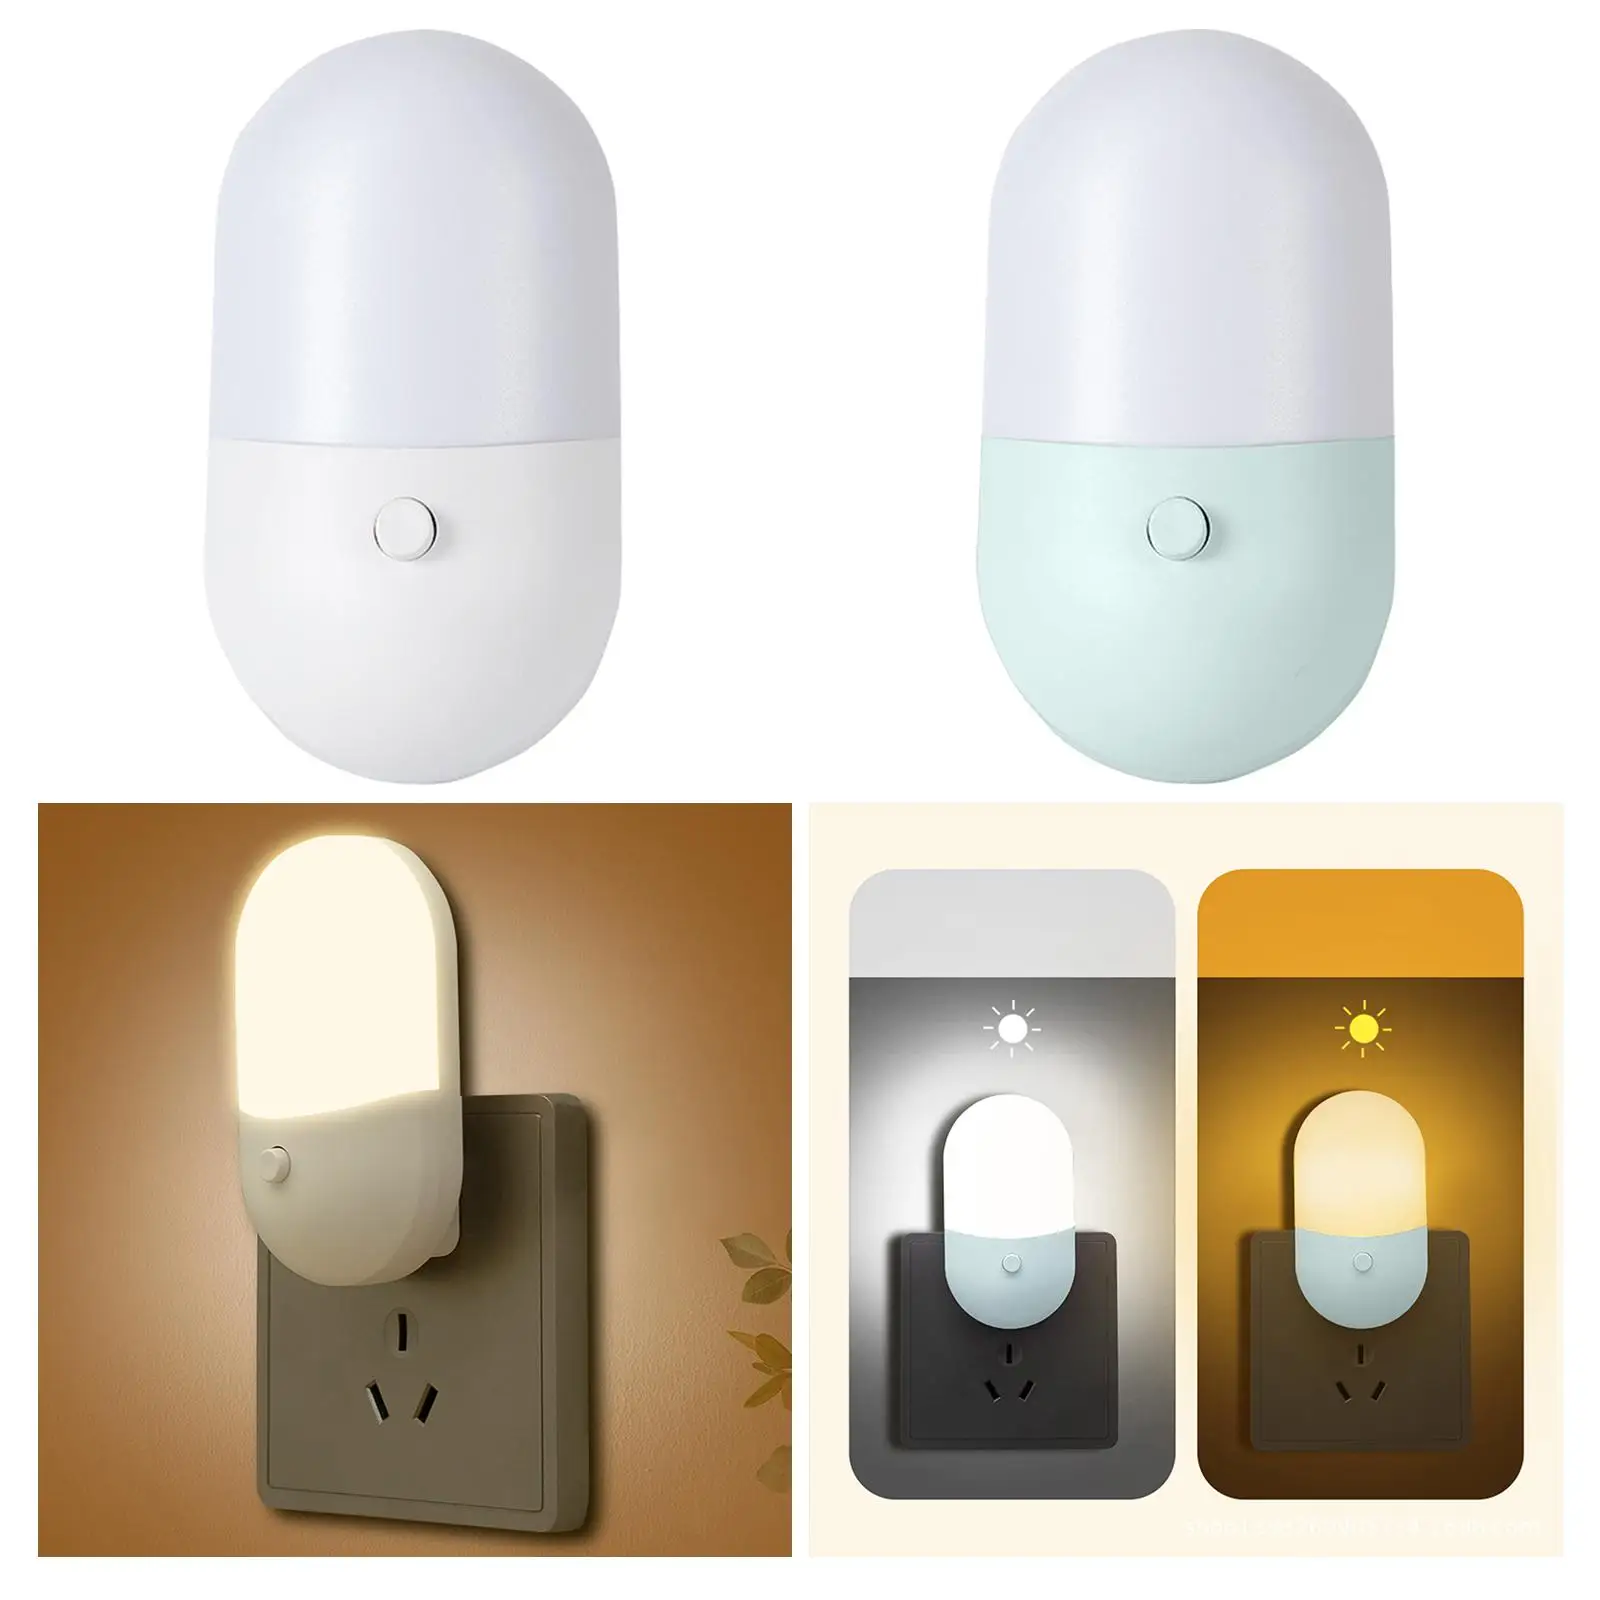 Table Lamp Bedside Lamp Feeding LED Button Switch Night Light Desk Lights Socket Lamp for Study Room Office Home NightStand